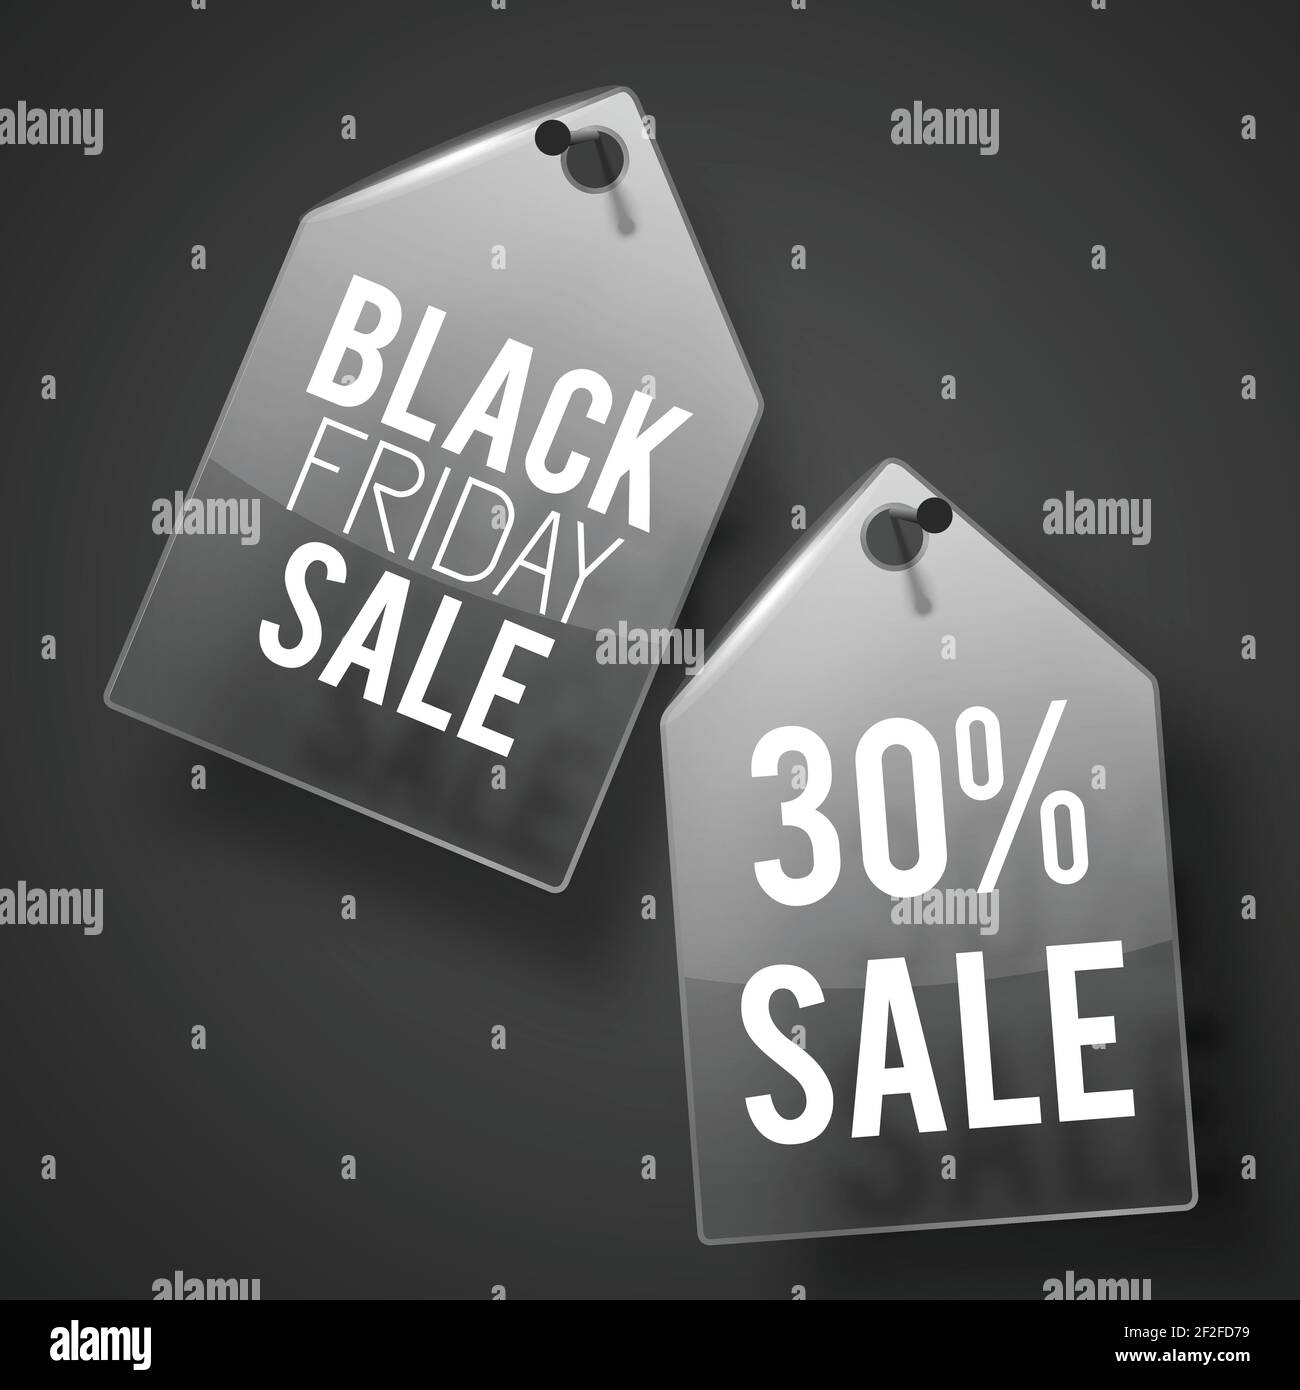 Two black friday sale tag set on wall with shadows and white texts vector illustration Stock Vector